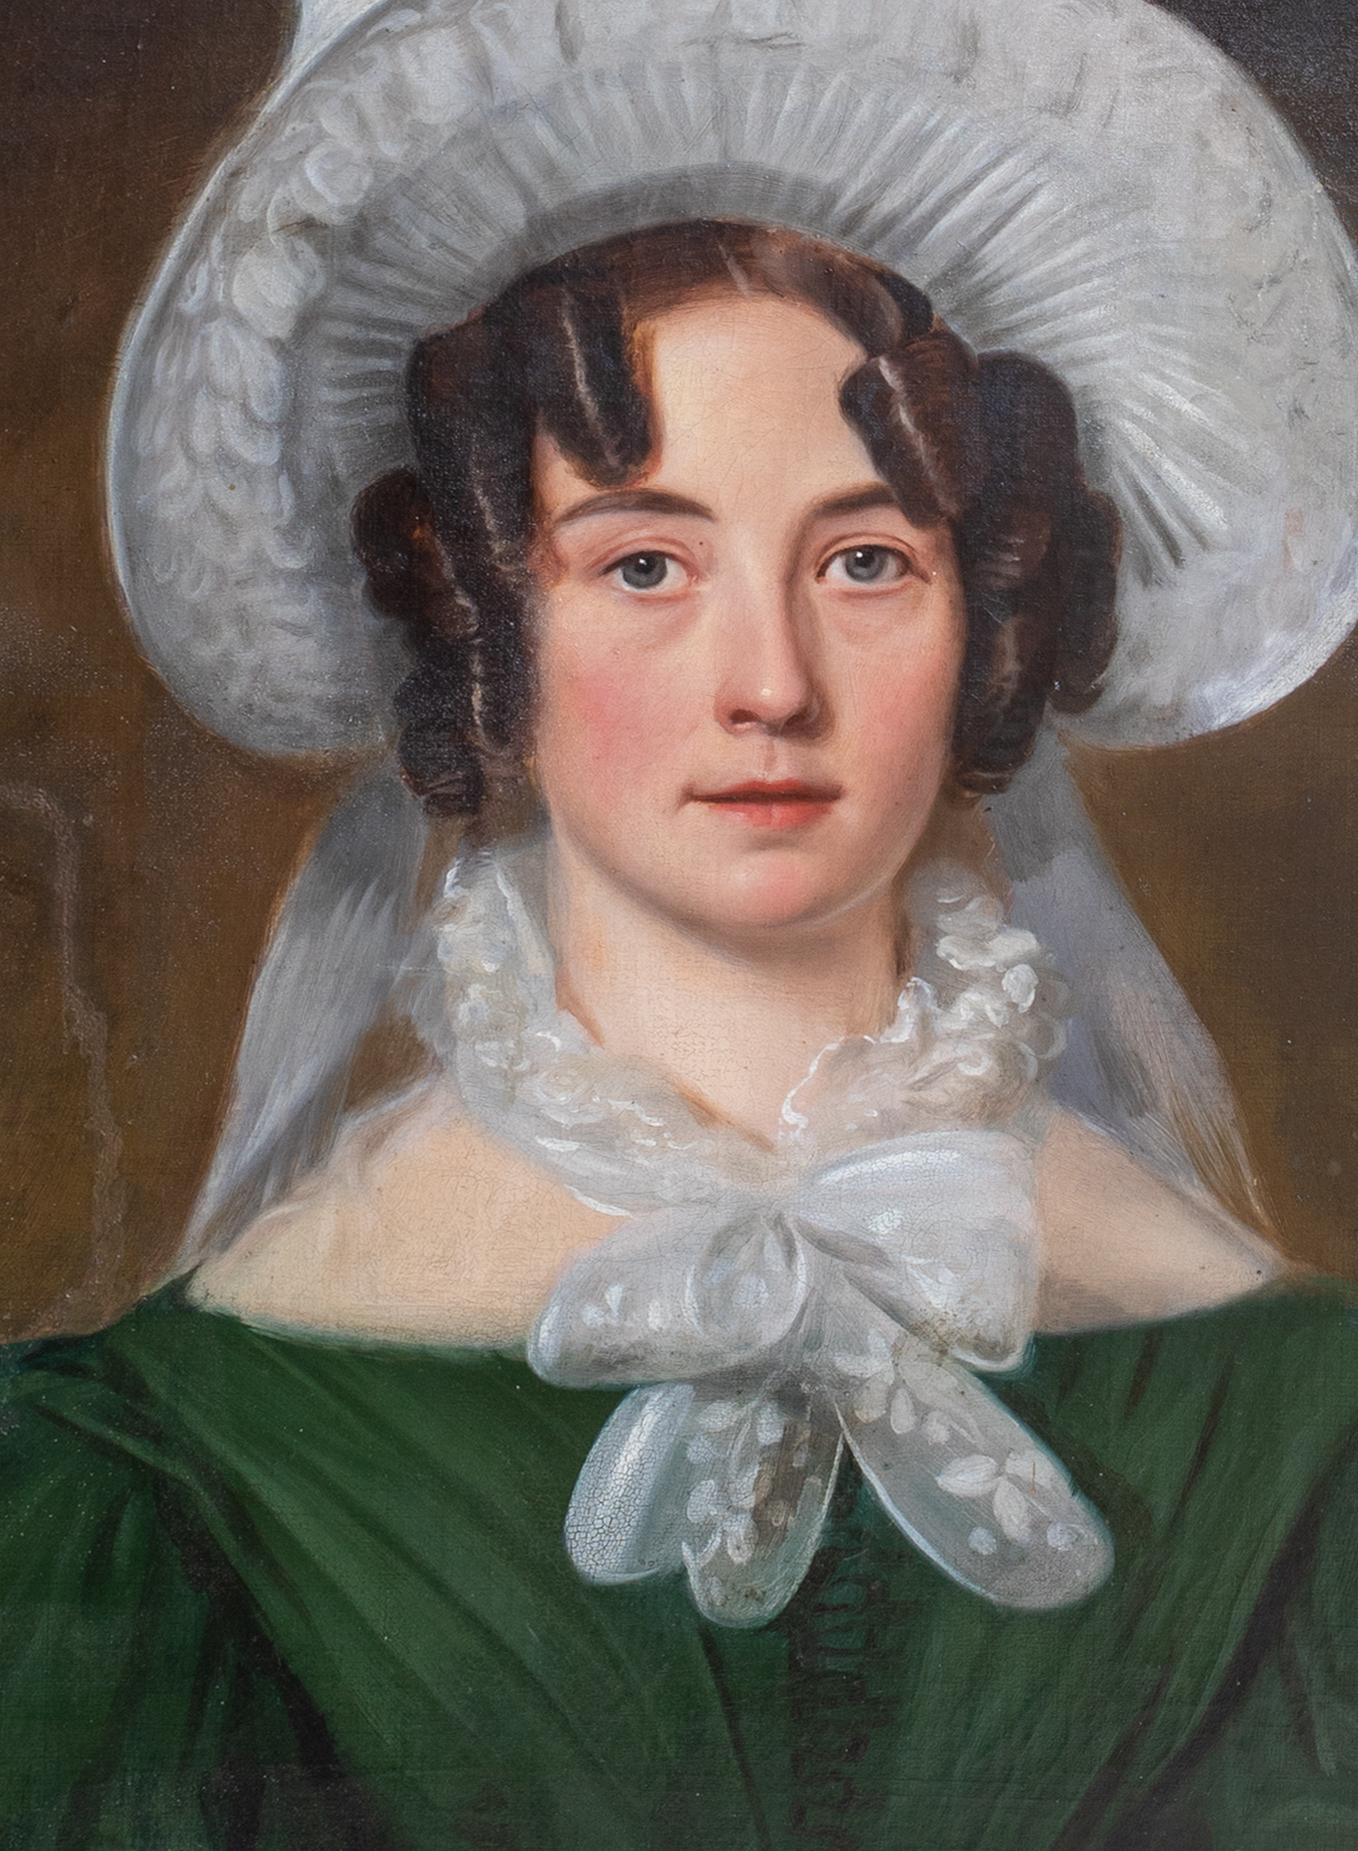 Portrait Of Matilda Currie, aged 28, Wearing an elaborate Bonnet, 19th Century   For Sale 4